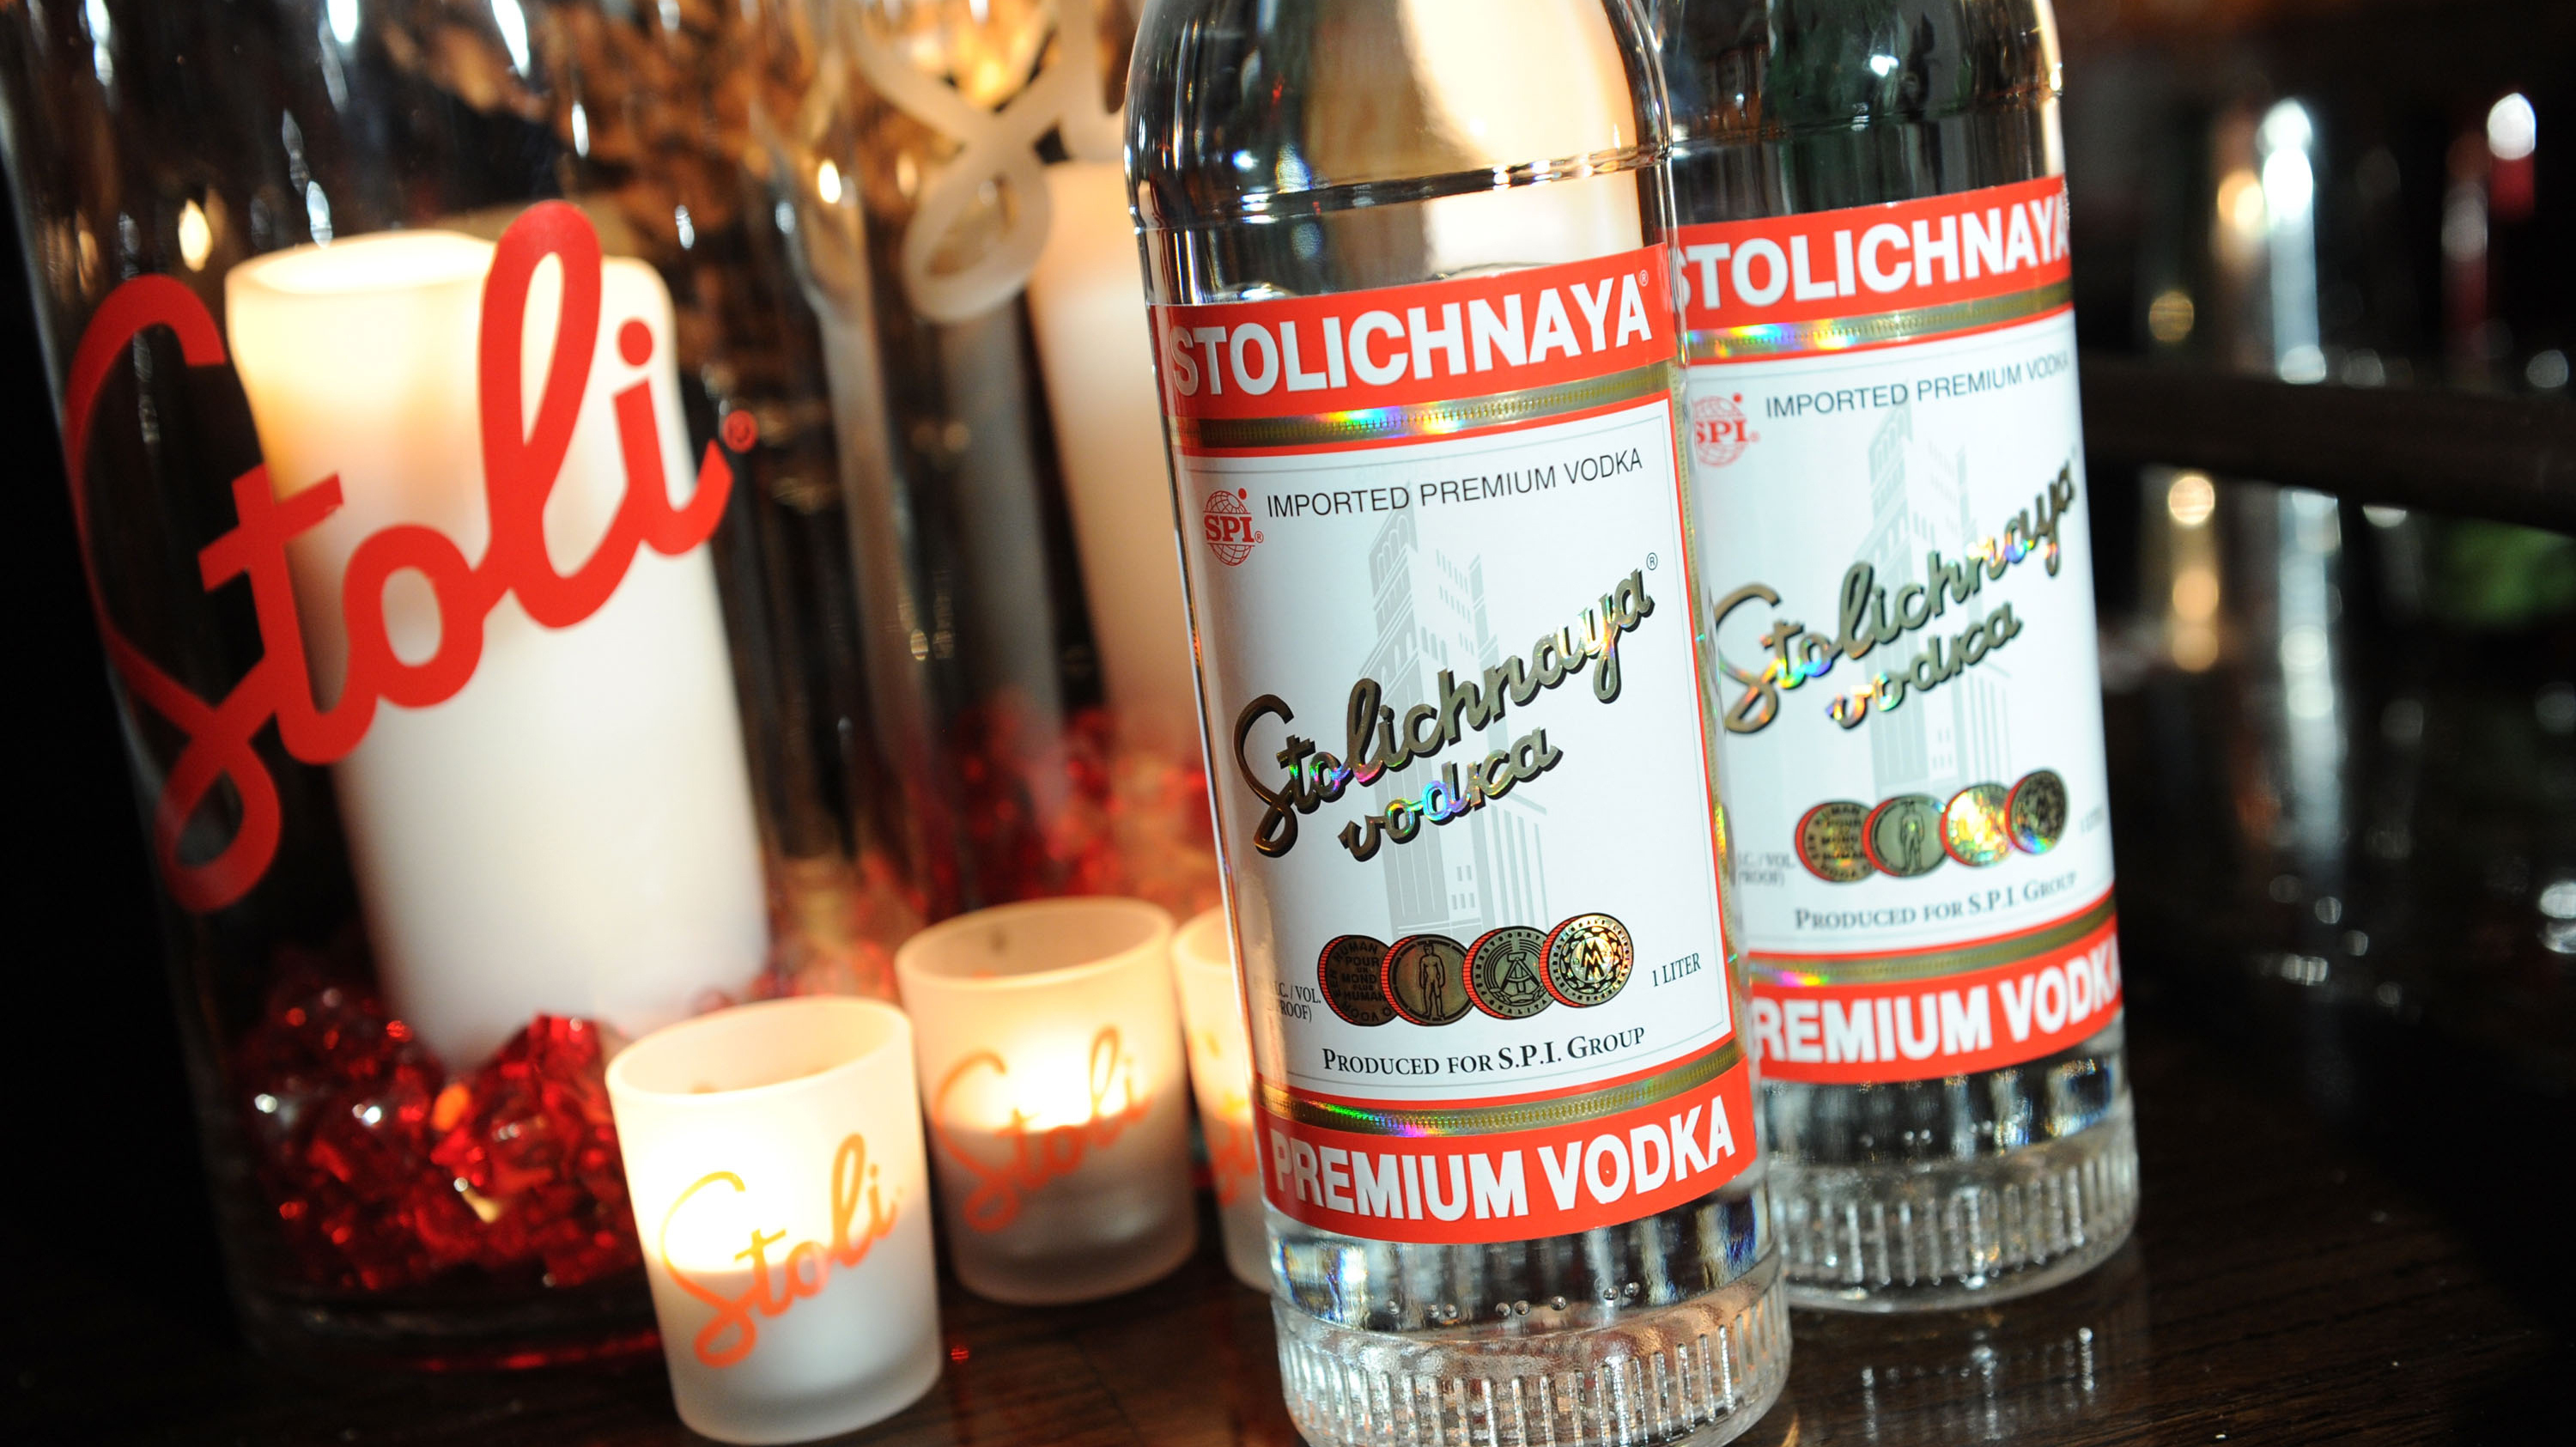 If you look carefully, you'll see that the labels on bottles of Stolichnaya vodka sold outside Russia (like these in New York City) read "Premium Vodka," not "Russian Vodka."